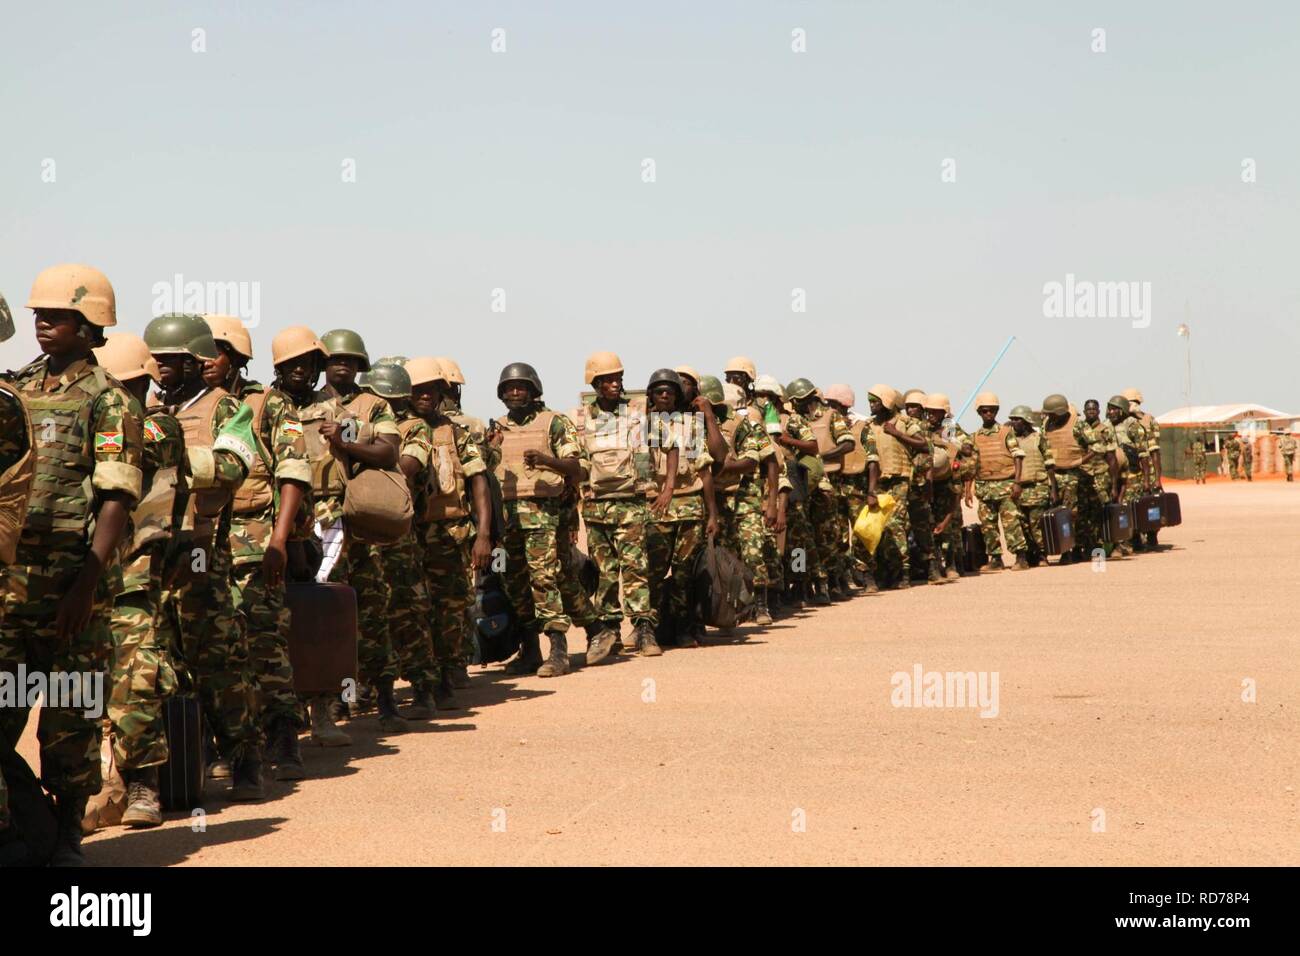 Amisom Burundian 80 contingent of troops depart from Kismayo International Airport for rotation, after serving more than one year in Kismayo, Somalia. On November 17, 2014 Stock Photo